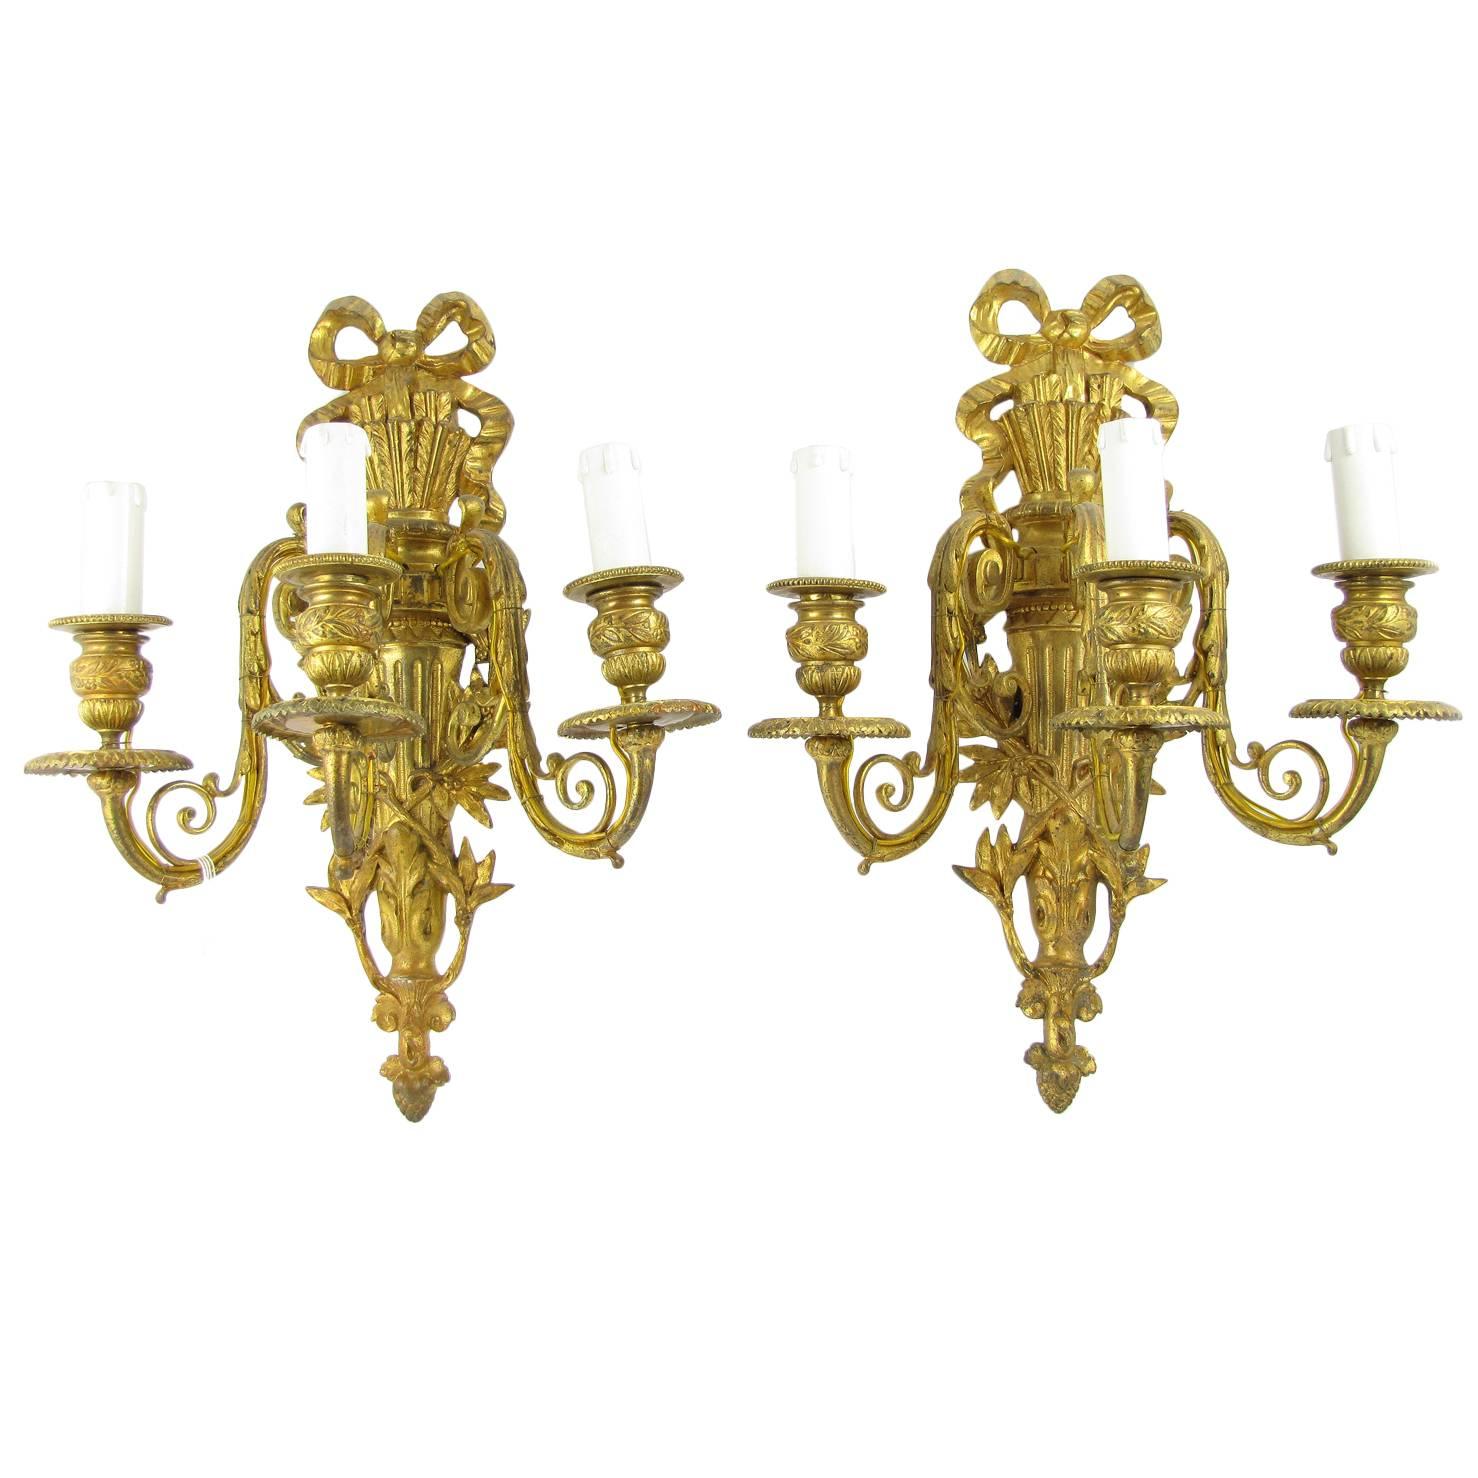 18th Century Italian Neoclassical Gilt Bronze Sconces with Three Arms